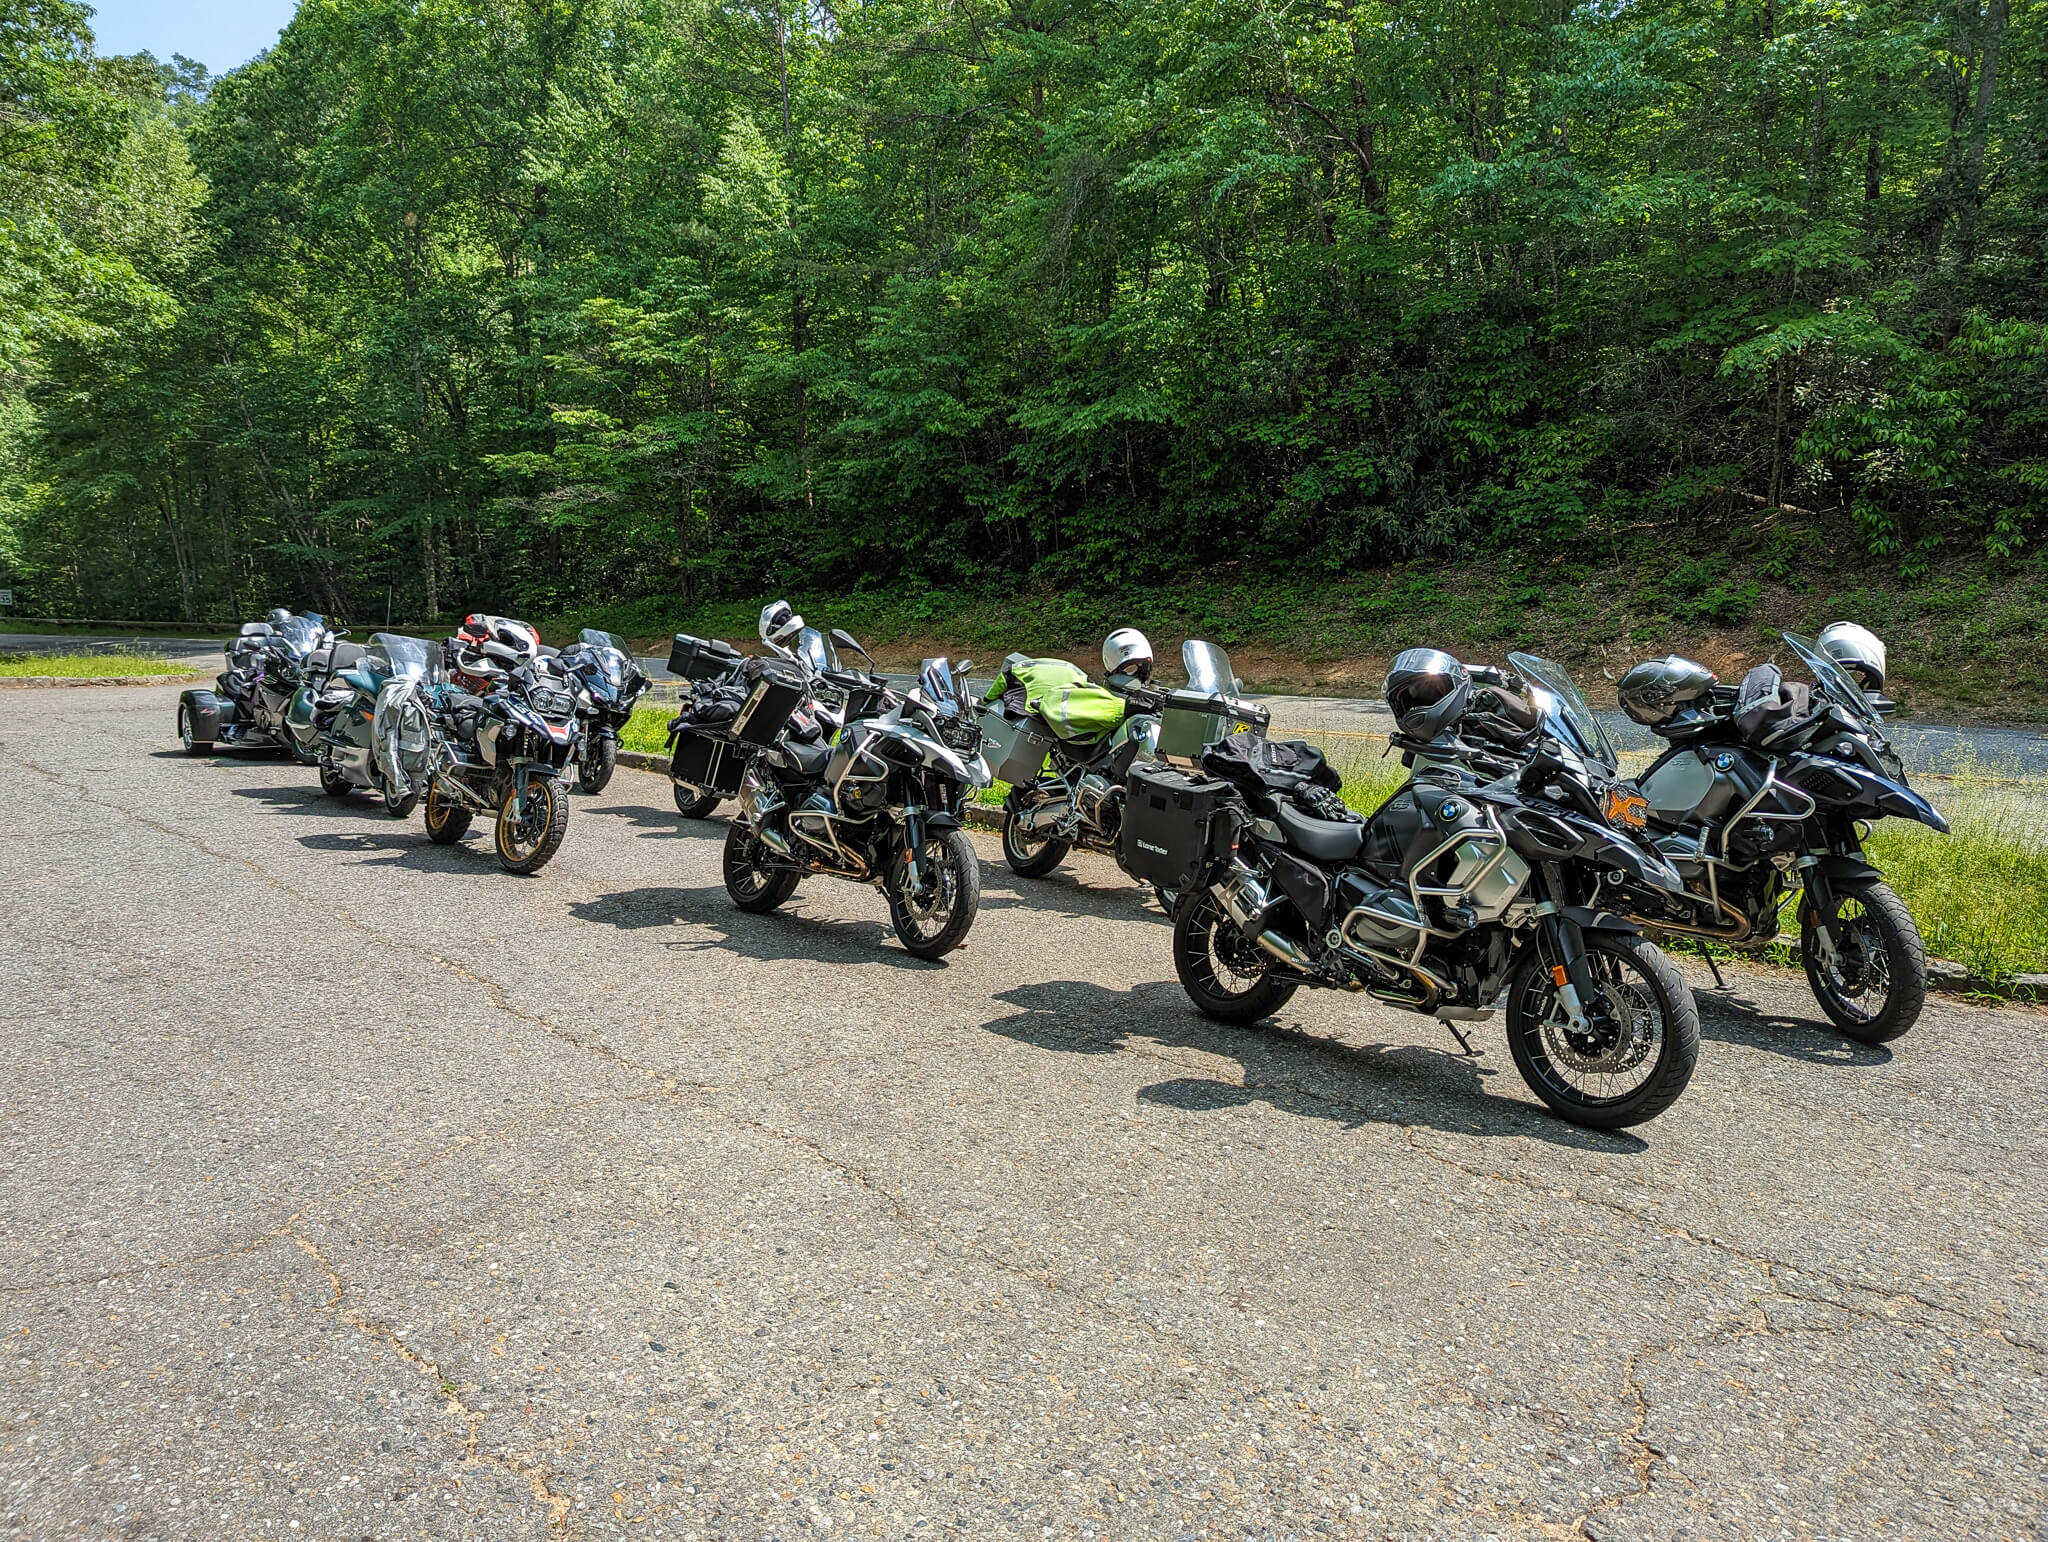 An orderly row of staggered BMW motorcycles